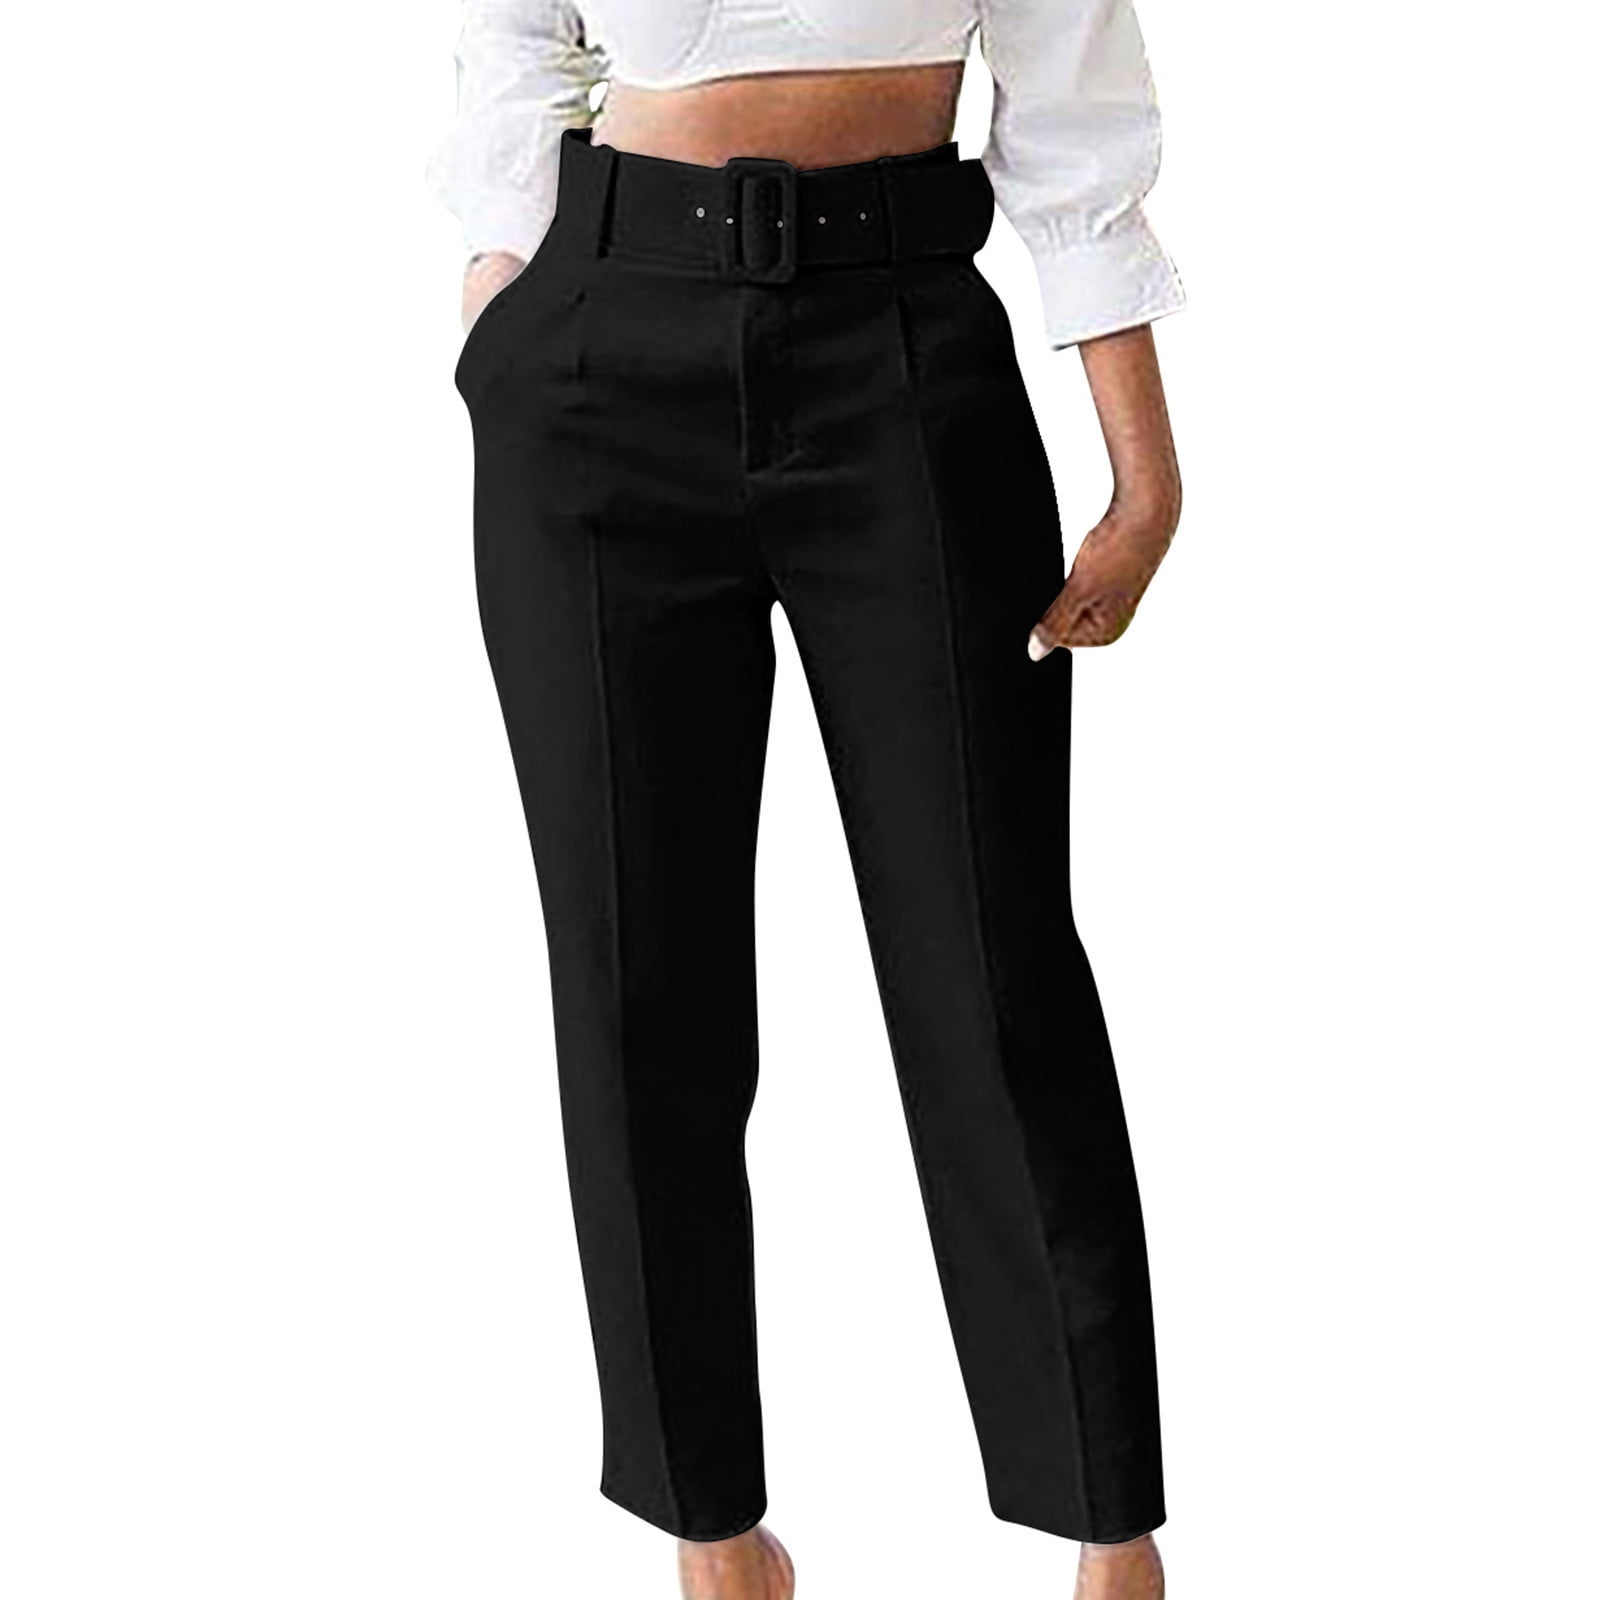 Jeans & Trousers | Black Formal Pant For Women | Freeup-hangkhonggiare.com.vn